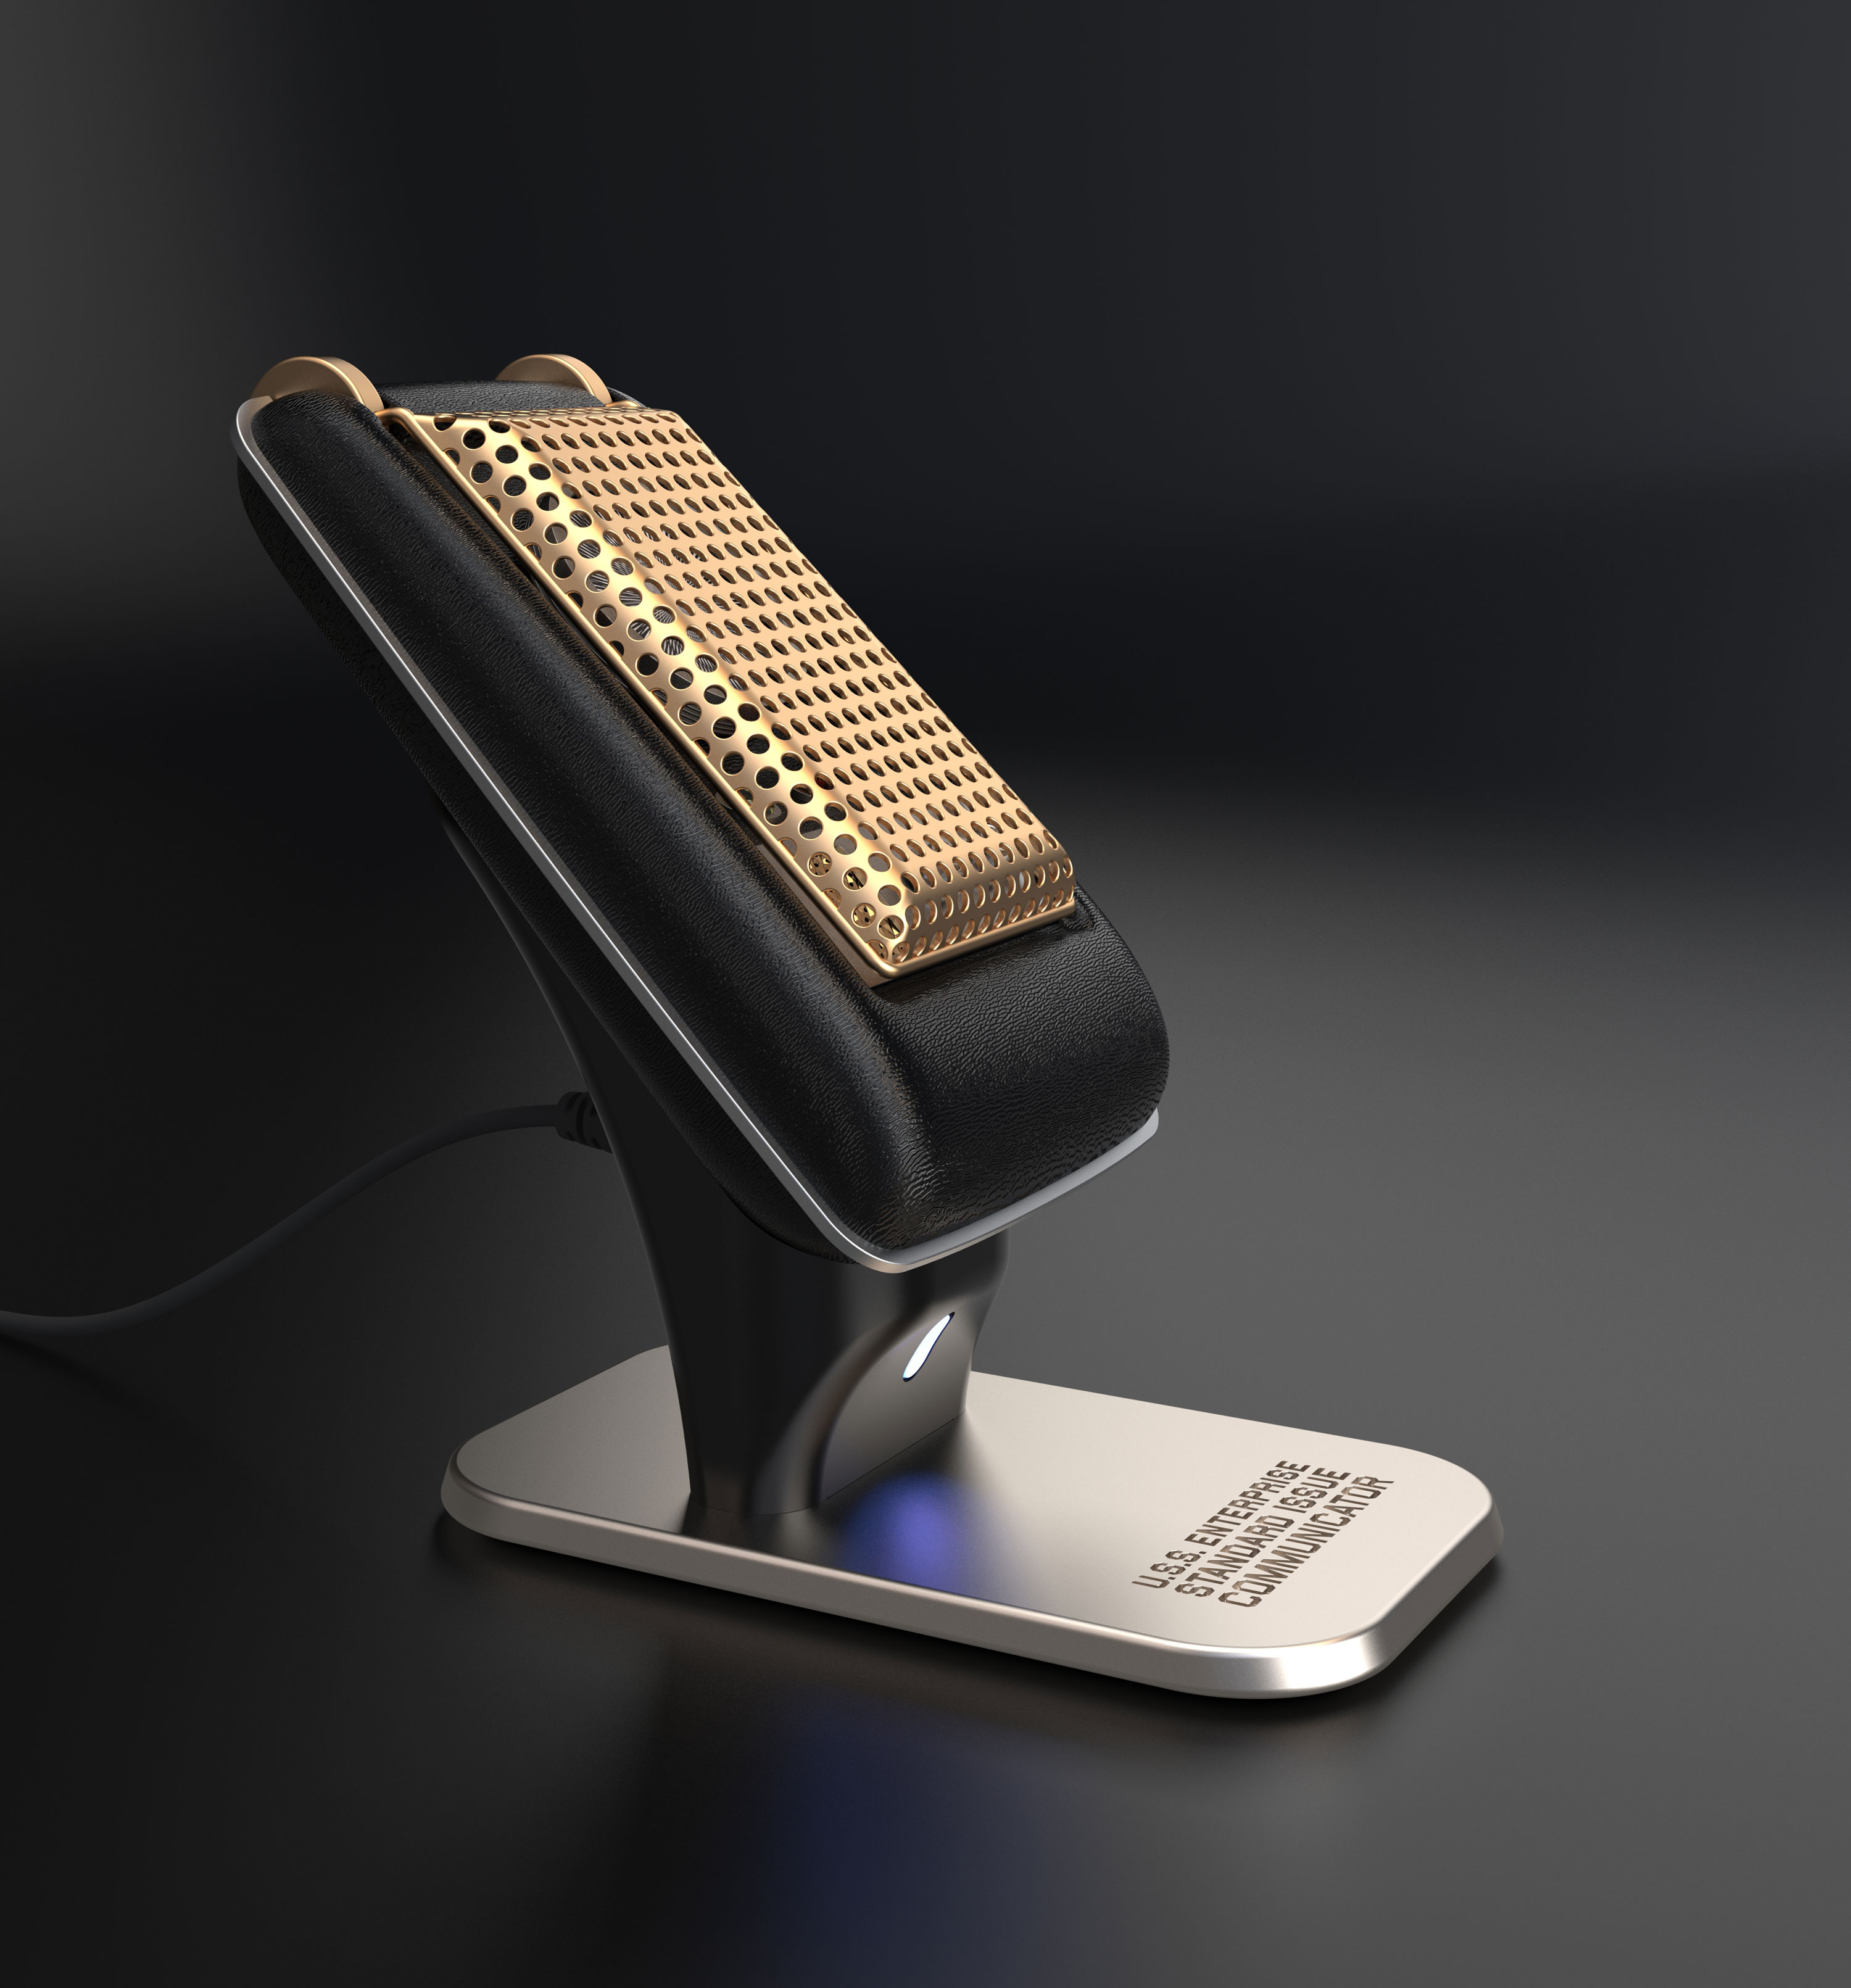 Bluetooth Star Trek Communicator Shows Just How Awesome Real Life Is Ars Technica